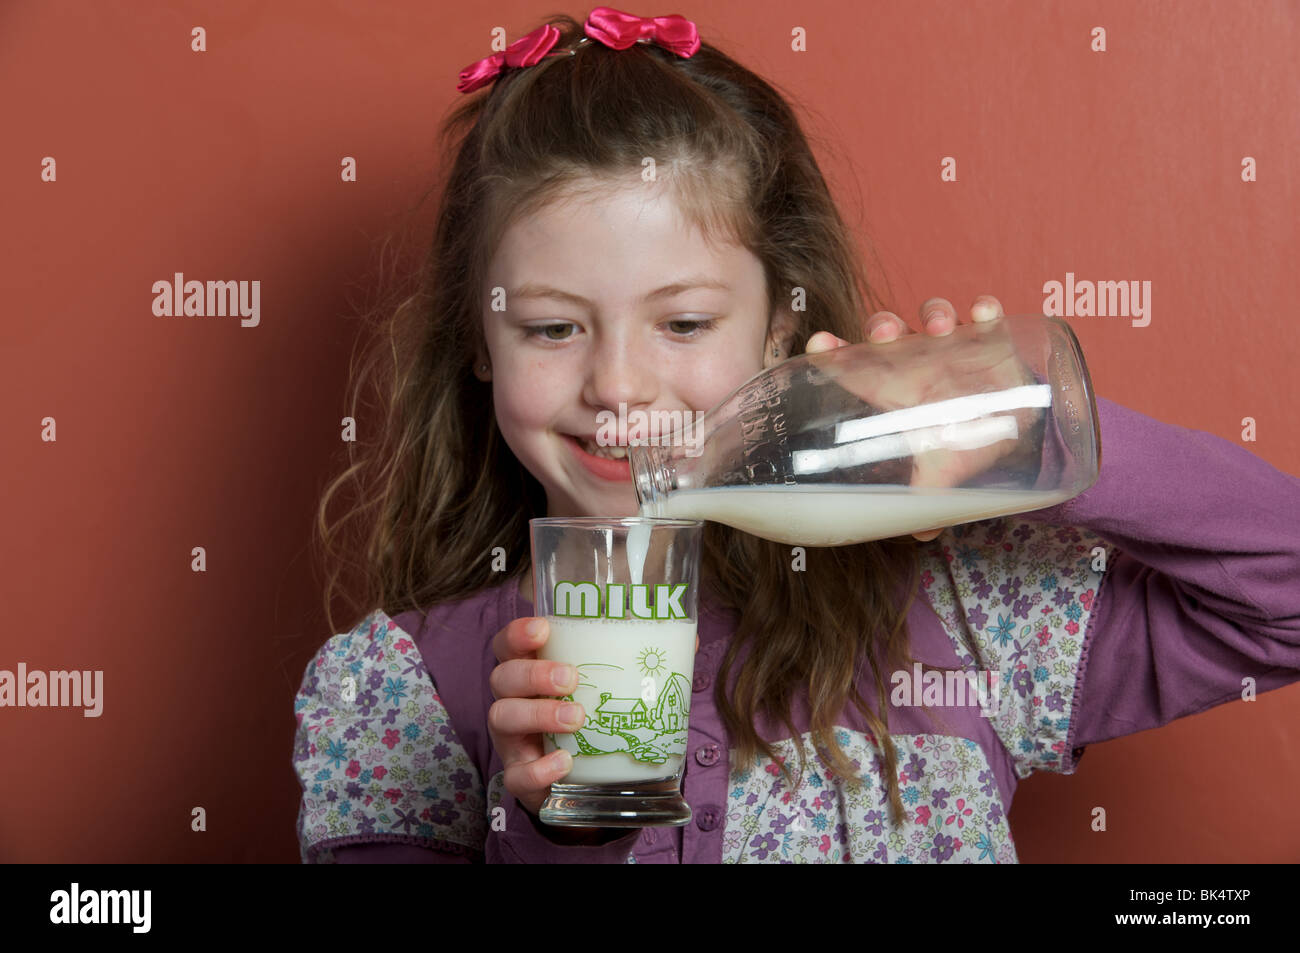 Young girl pouring a glass of milk, UK. Stock Photo